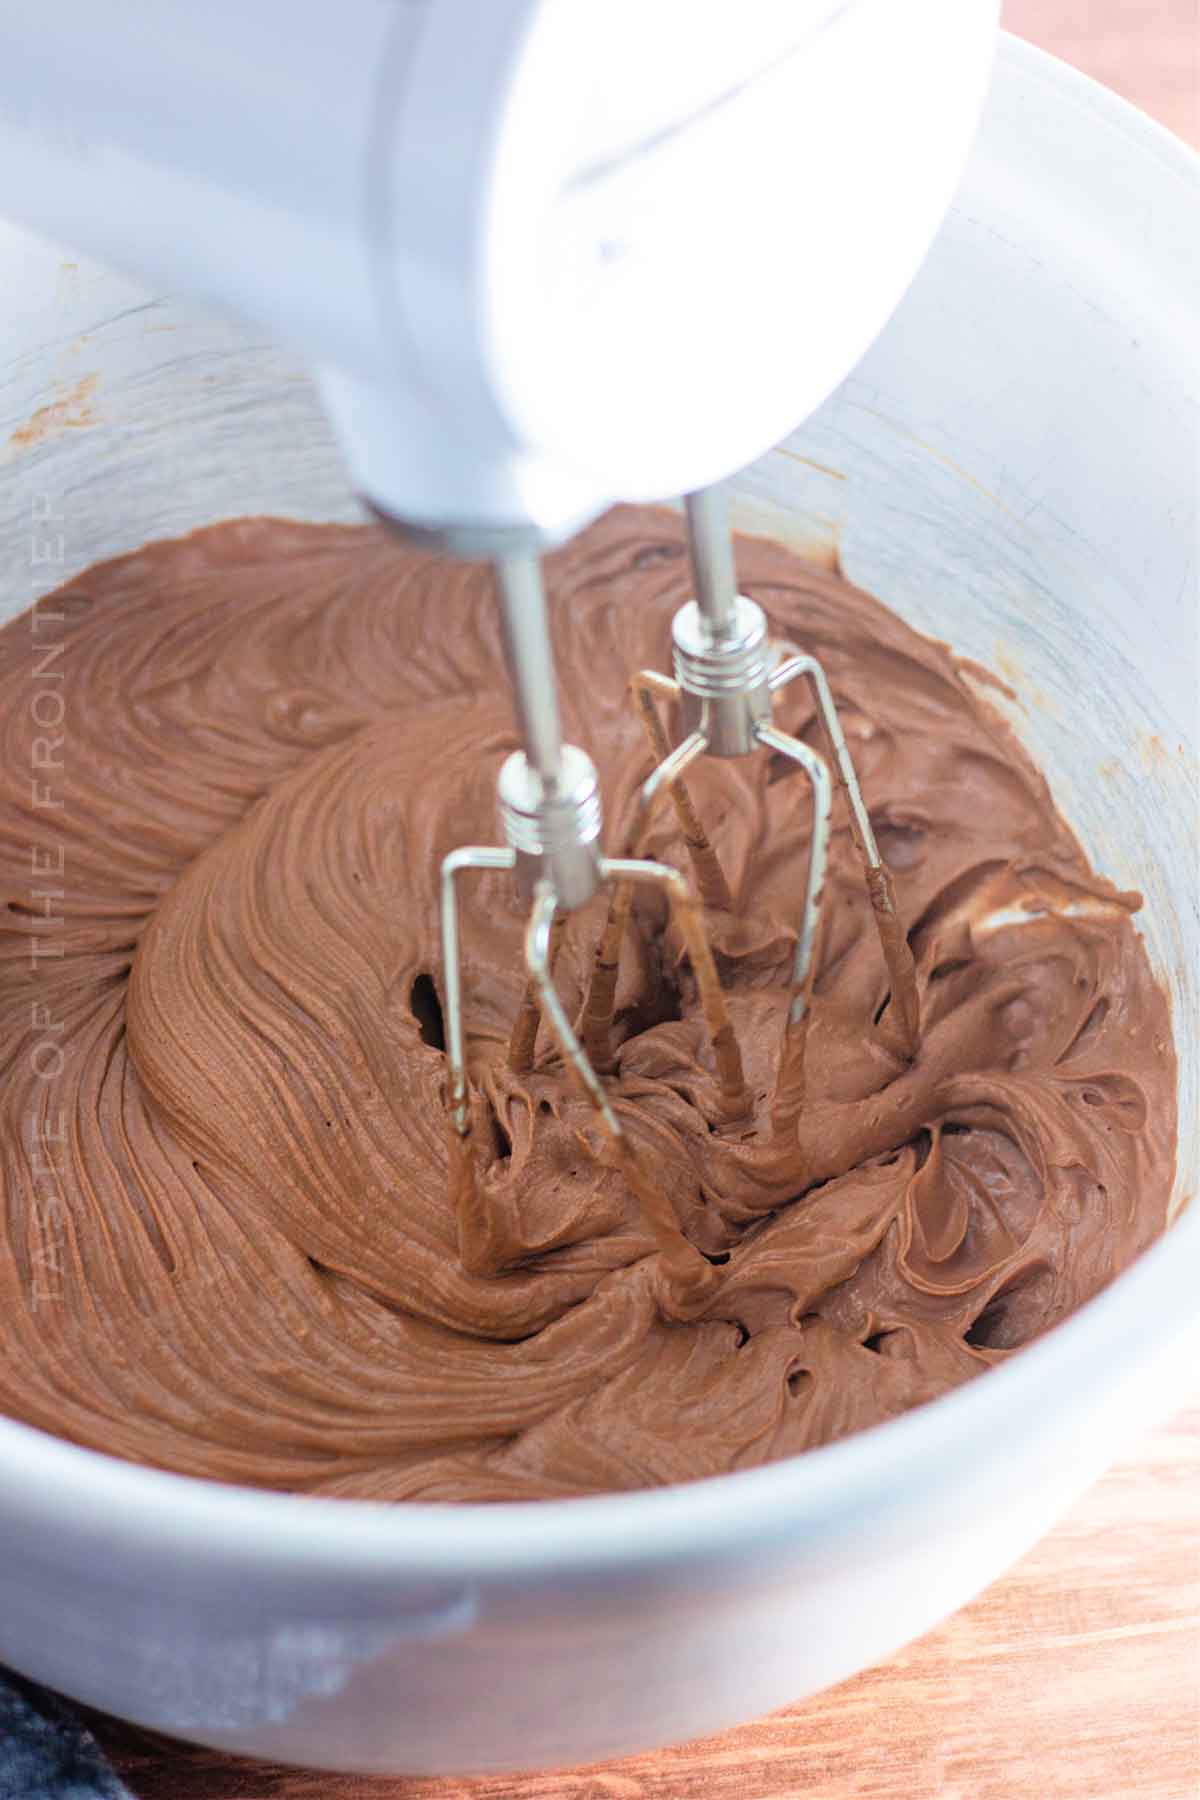 making the chocolate filling